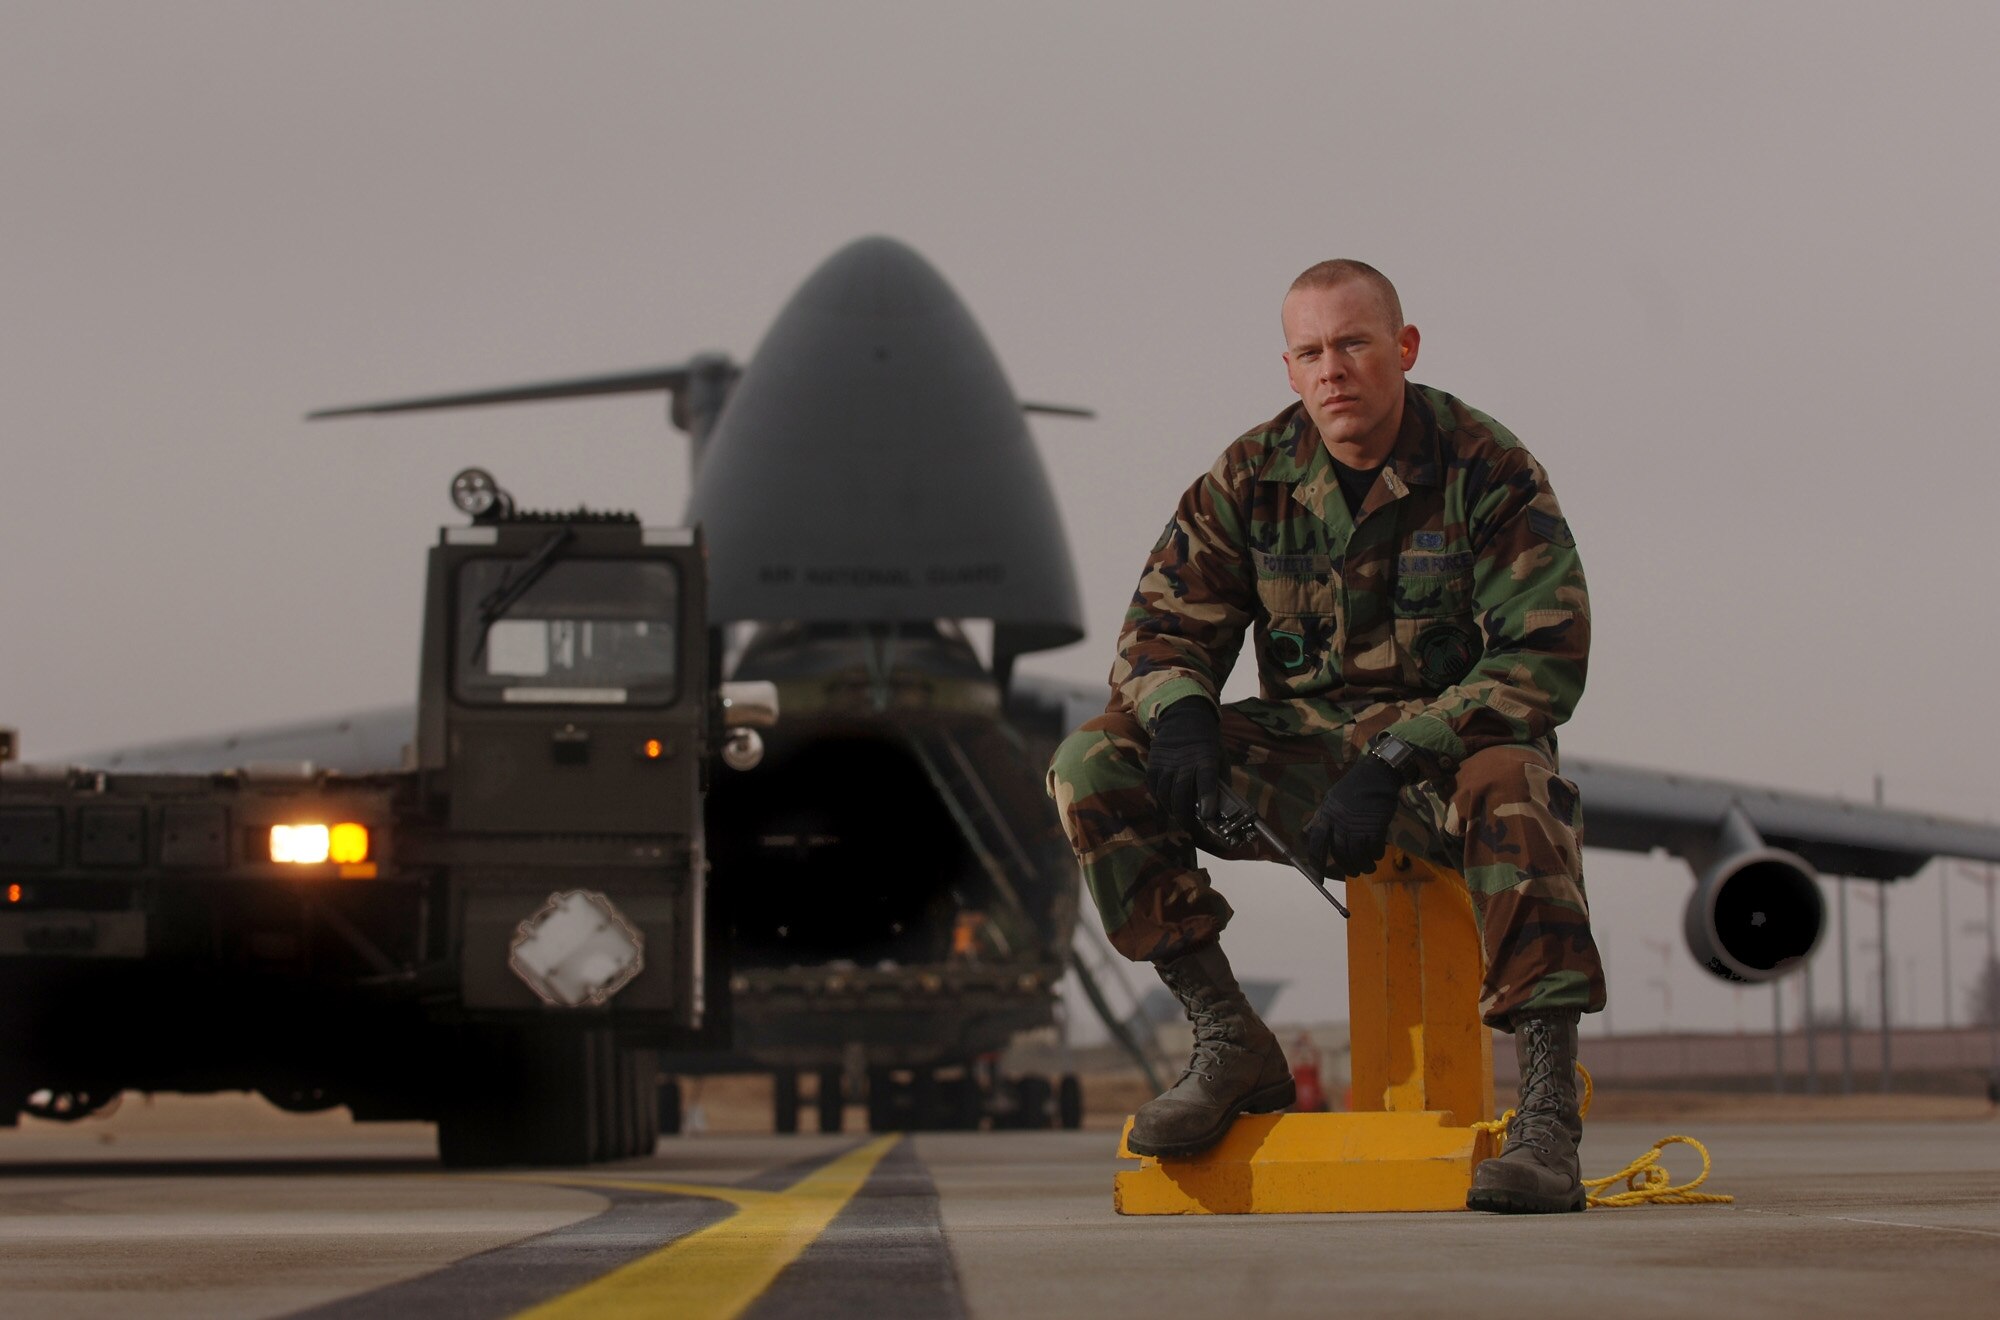 SPANGDAHLEM AIR BASE, Germany -- Air Transportation specialist, Senior Airman Jason Poteete and a 60K loader waits on the hot cargo pad here ready to service a C-5 Galaxy returning from down range with explosive cargo. Airman Poteete is assigned to the 726th Air Mobility Squadron. (U.S. Air Force photo/Master Sgt. Scott Wagers)